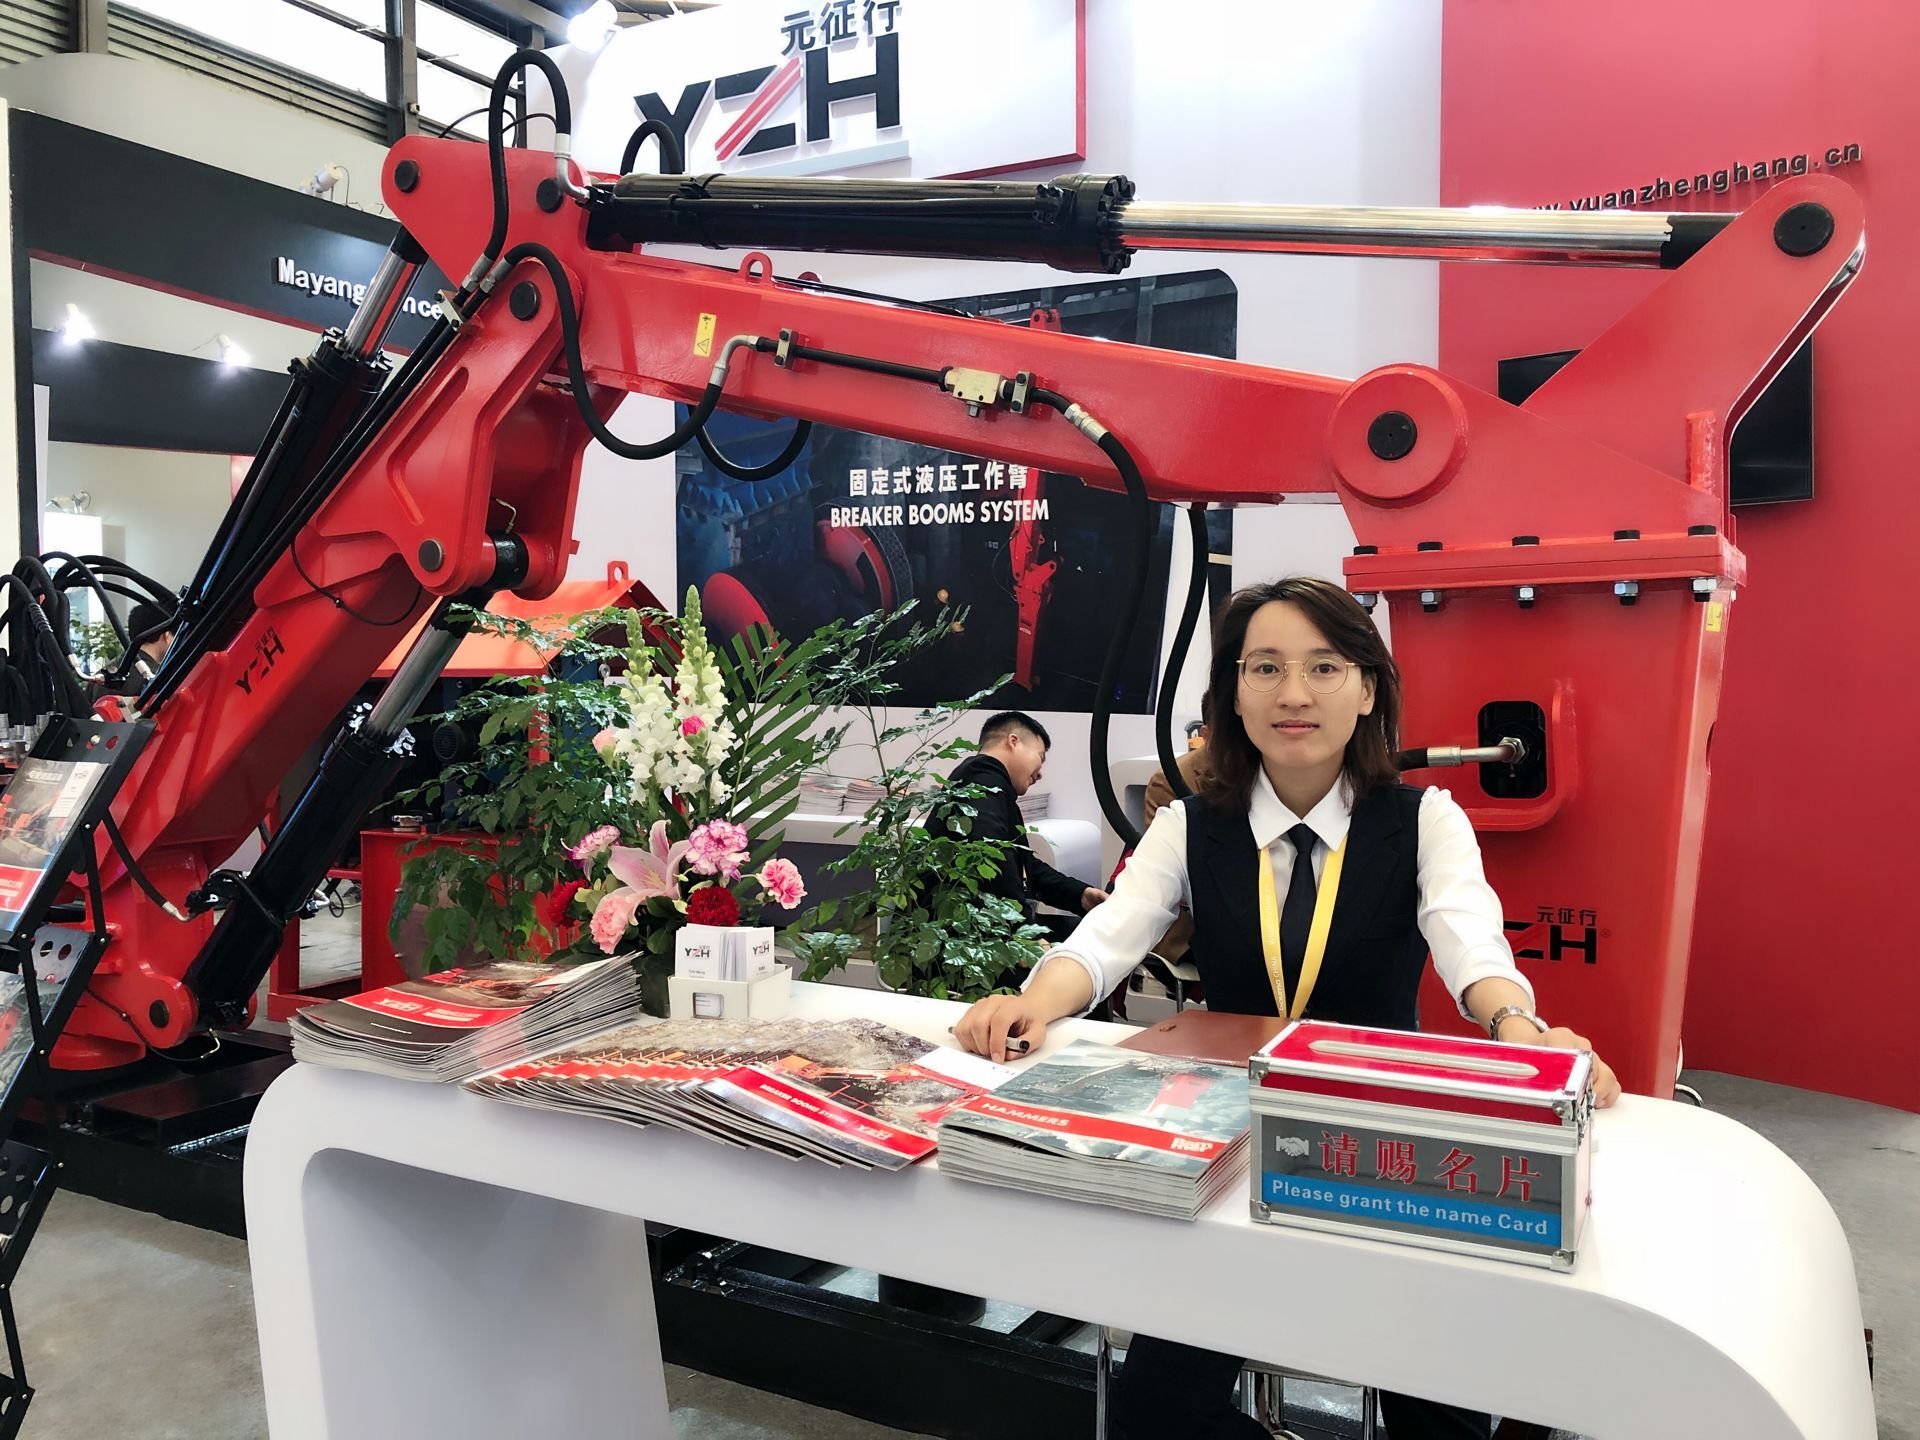 YZH Brand Breaker Booms System Was Showcased At The Bauma CHINA Exhibition